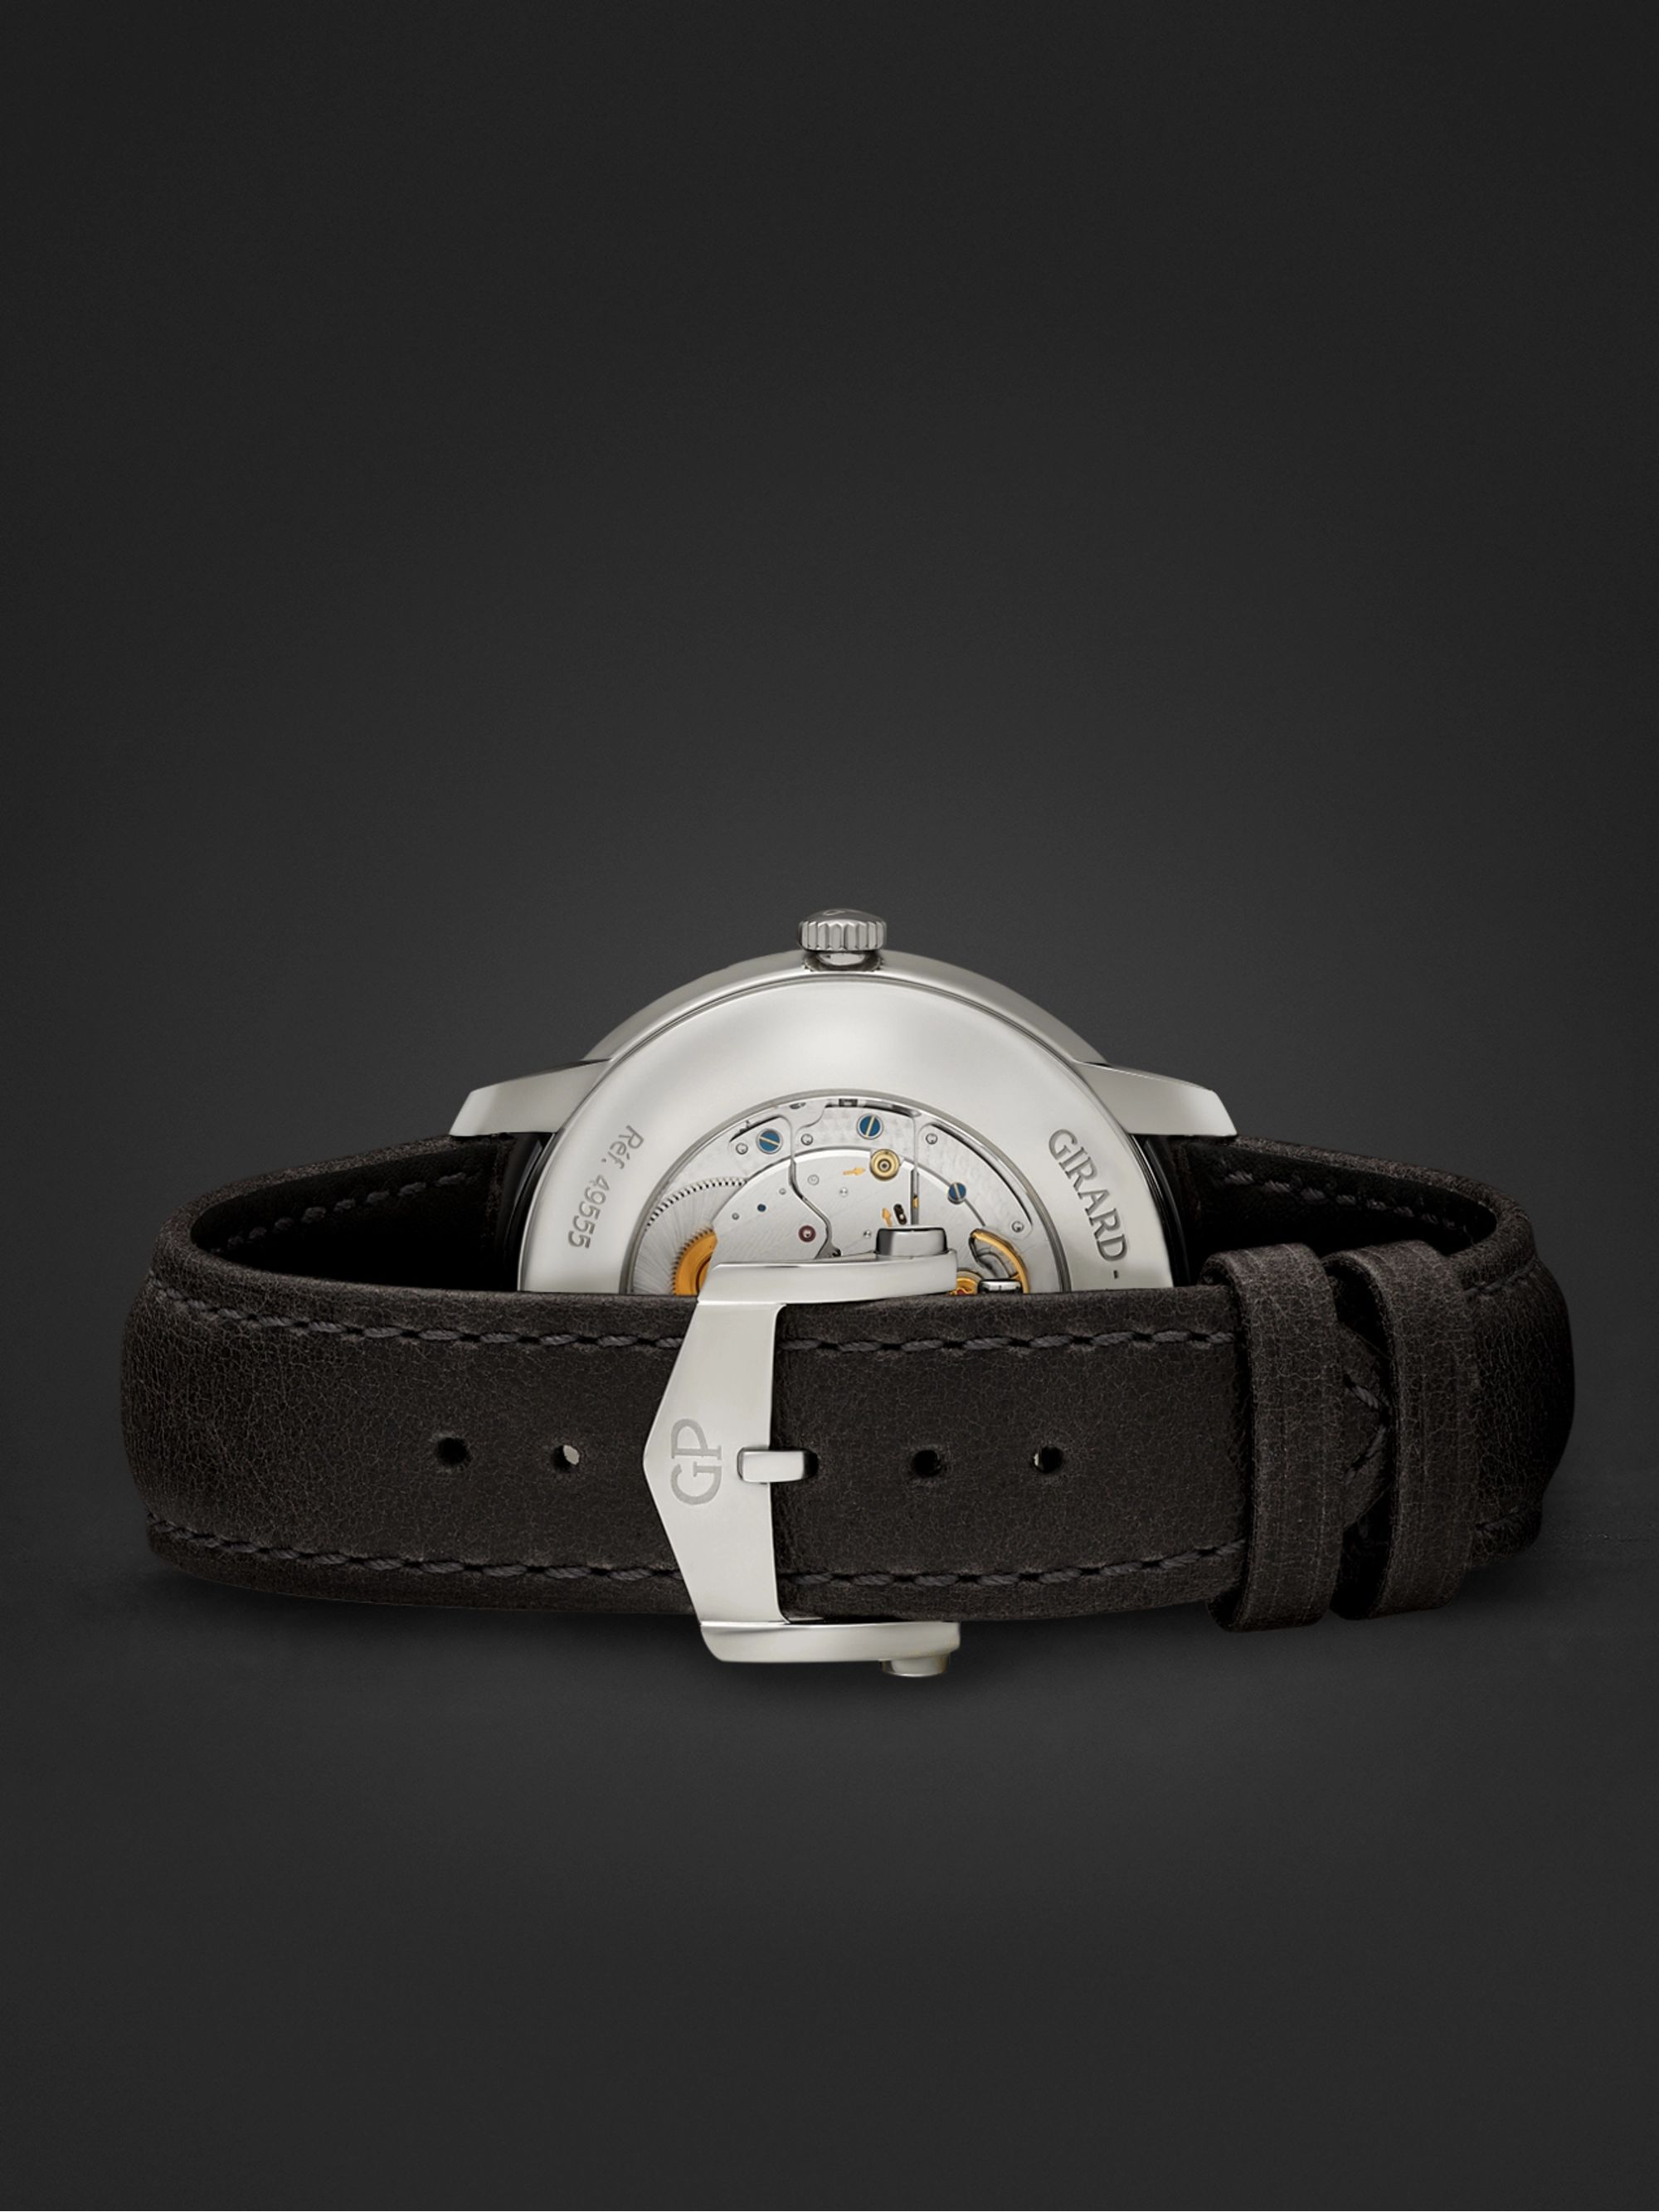 GIRARD-PERREGAUX 1966 Infinity Edition Automatic 40mm Stainless Steel and Leather Watch, Ref. No. 49555-11-632-BB60